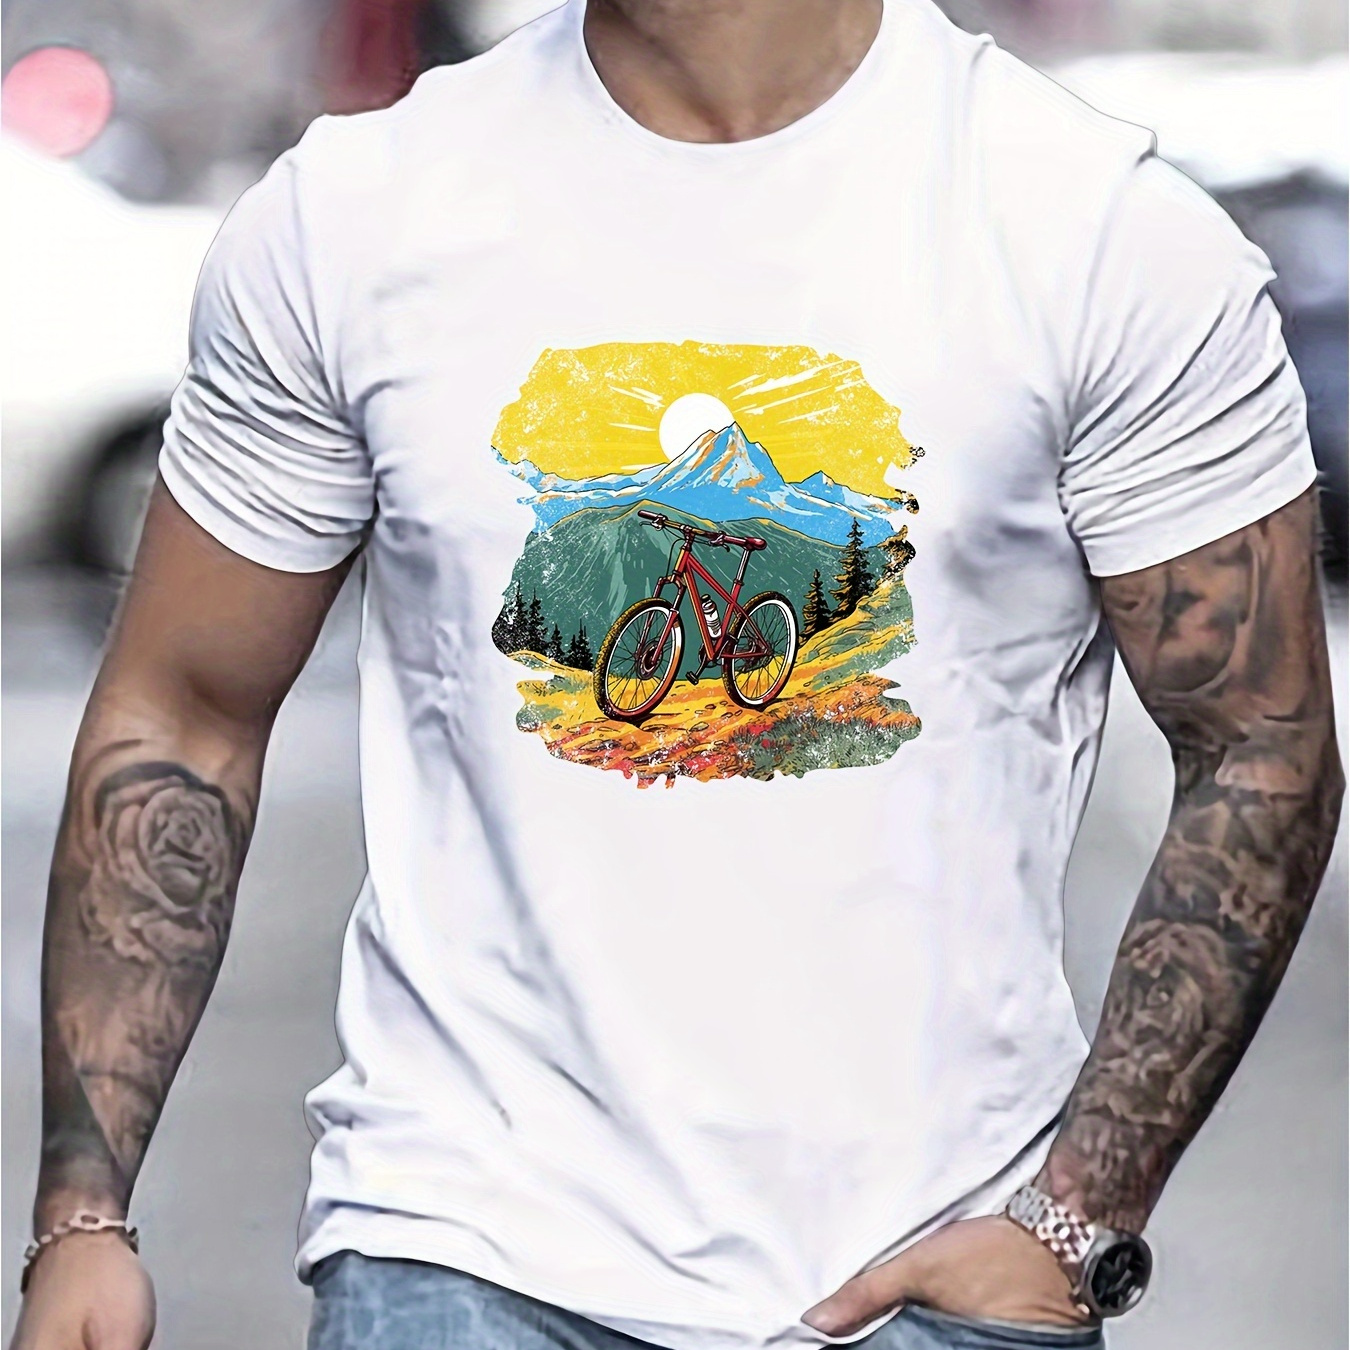 

Pure Cotton Men's T-shirt, Mountain Bike Scene Print Short Sleeve Crew Neck Tees For Summer, Casual Outdoor Comfy Clothing For Male